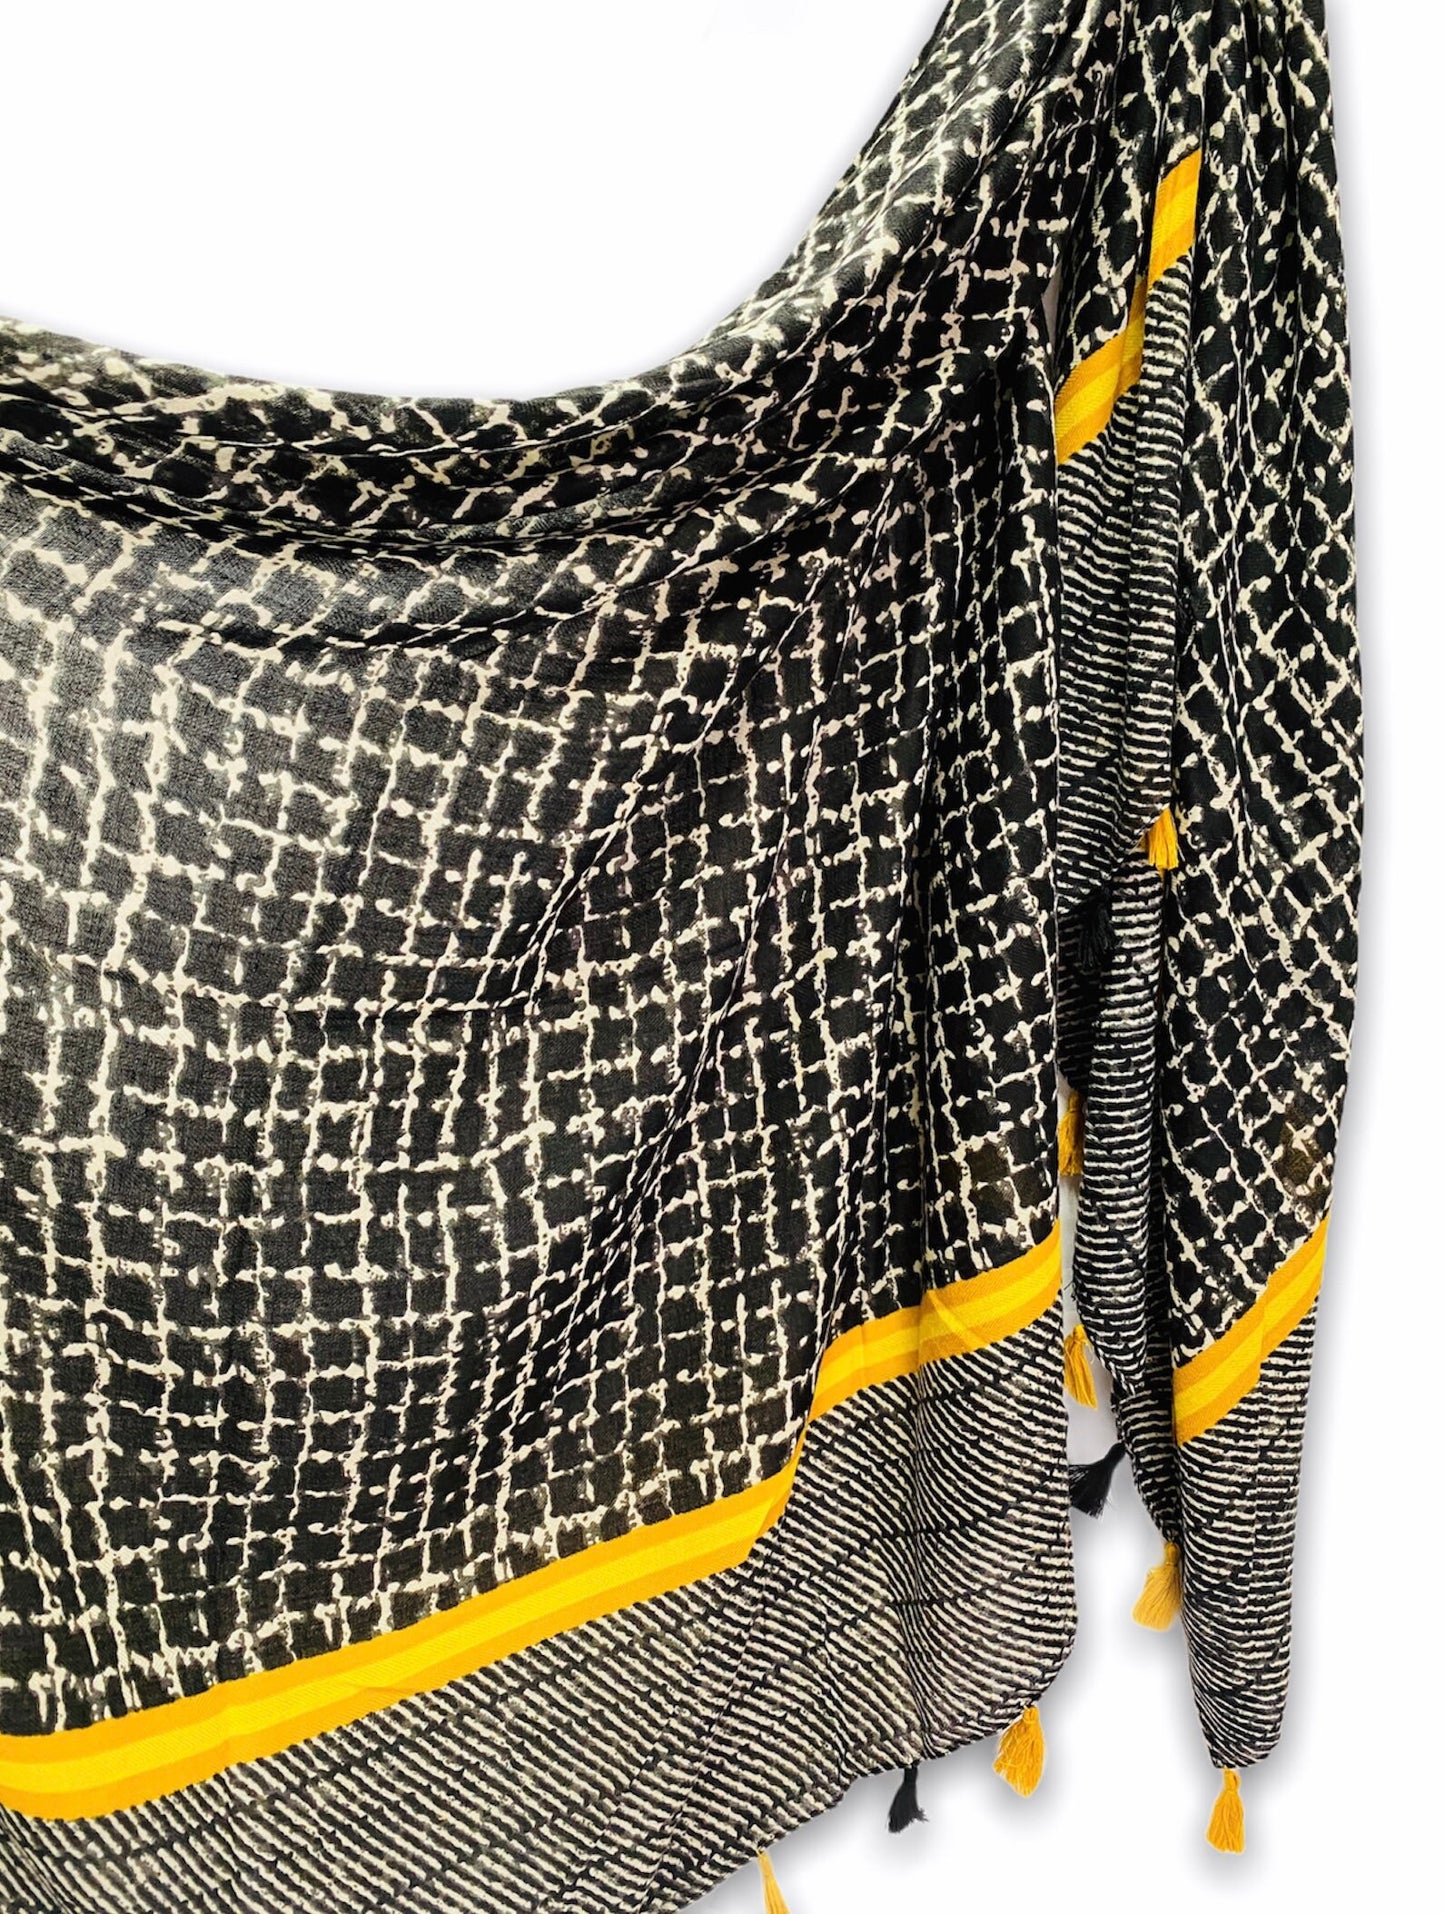 Tweed Pattern With Yellow Tassels Black Cotton Scarf/Spring Summer Autumn Scarf/Gifts For Mom/Gifts For Her/Scarf Women/Birthday Gifts